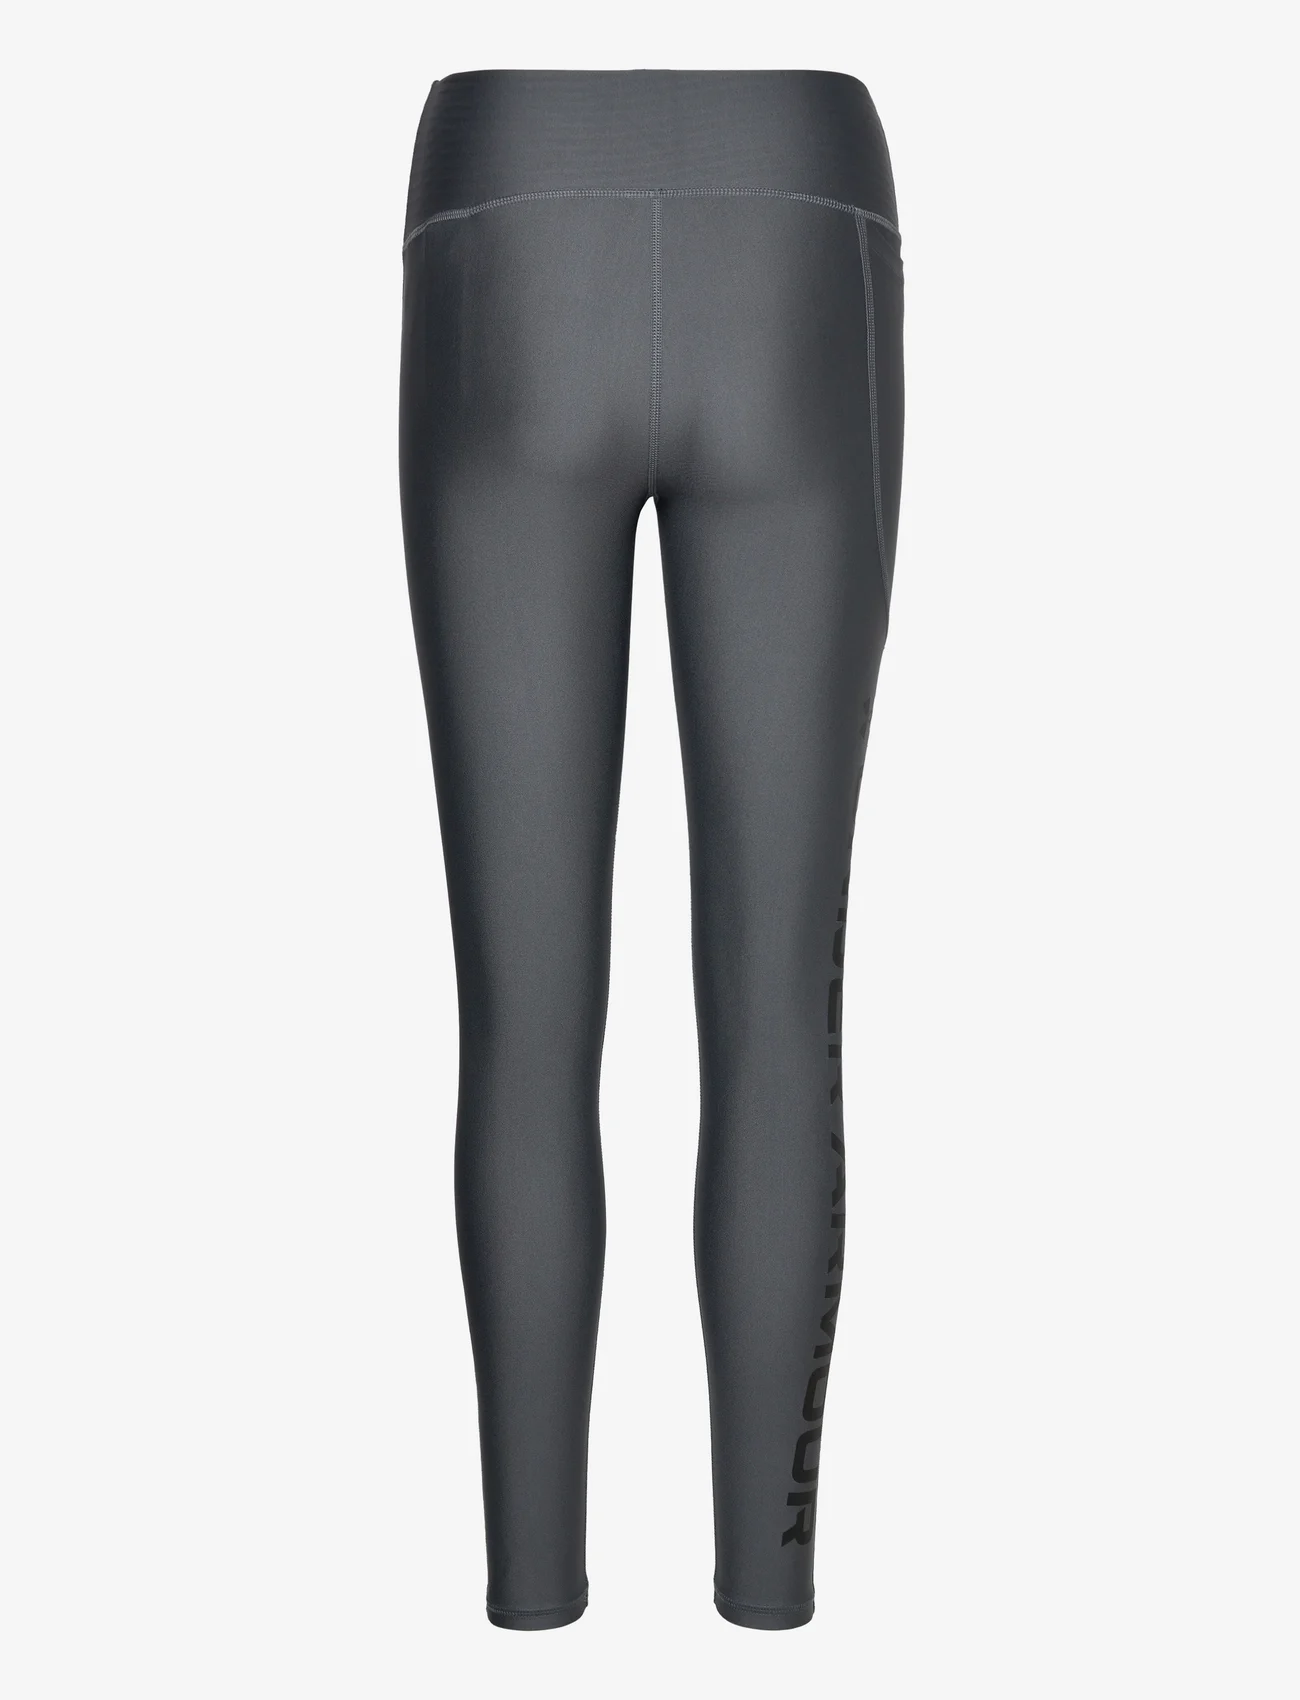 Under Armour - Armour Branded Legging - løpe-& treningstights - pitch gray - 1